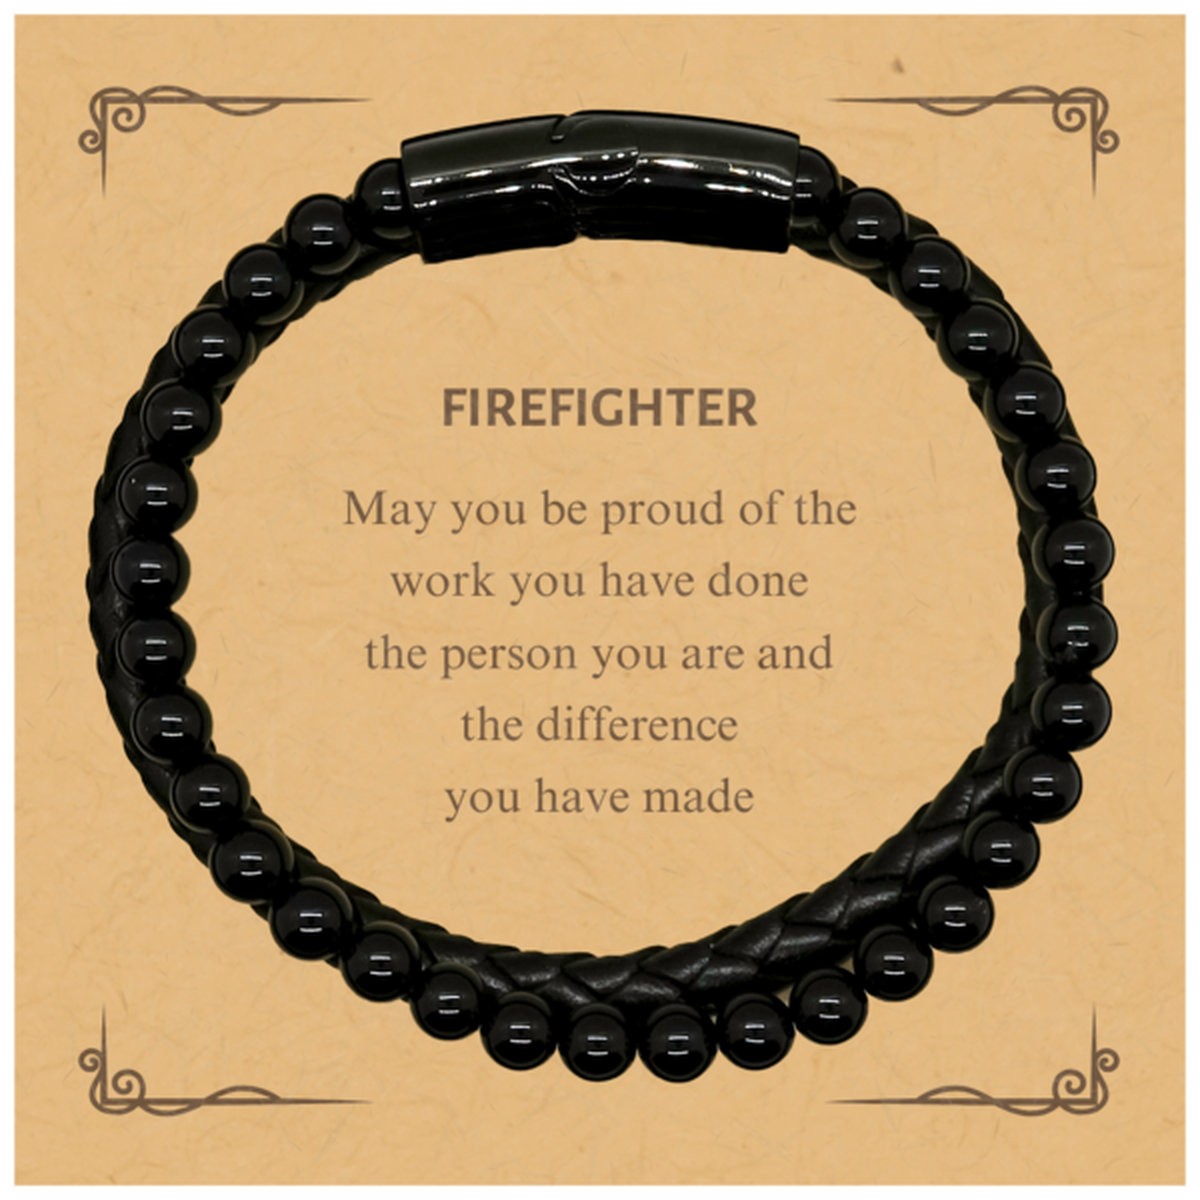 Firefighter May you be proud of the work you have done, Retirement Firefighter Stone Leather Bracelets for Colleague Appreciation Gifts Amazing for Firefighter